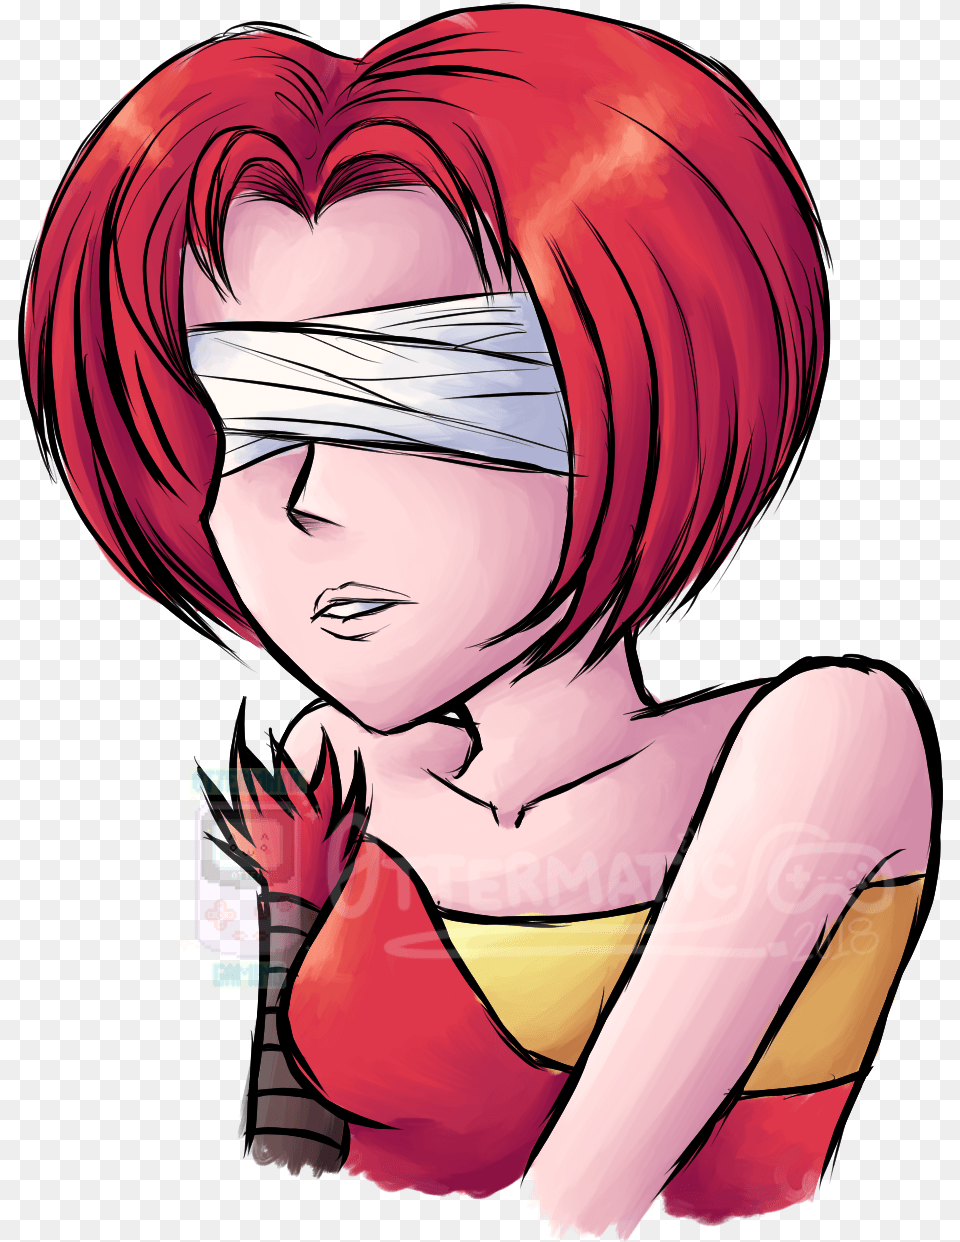 Idiot Is Wearing The Blindfold Wrong Fr Cartoon, Publication, Book, Comics, Adult Png Image